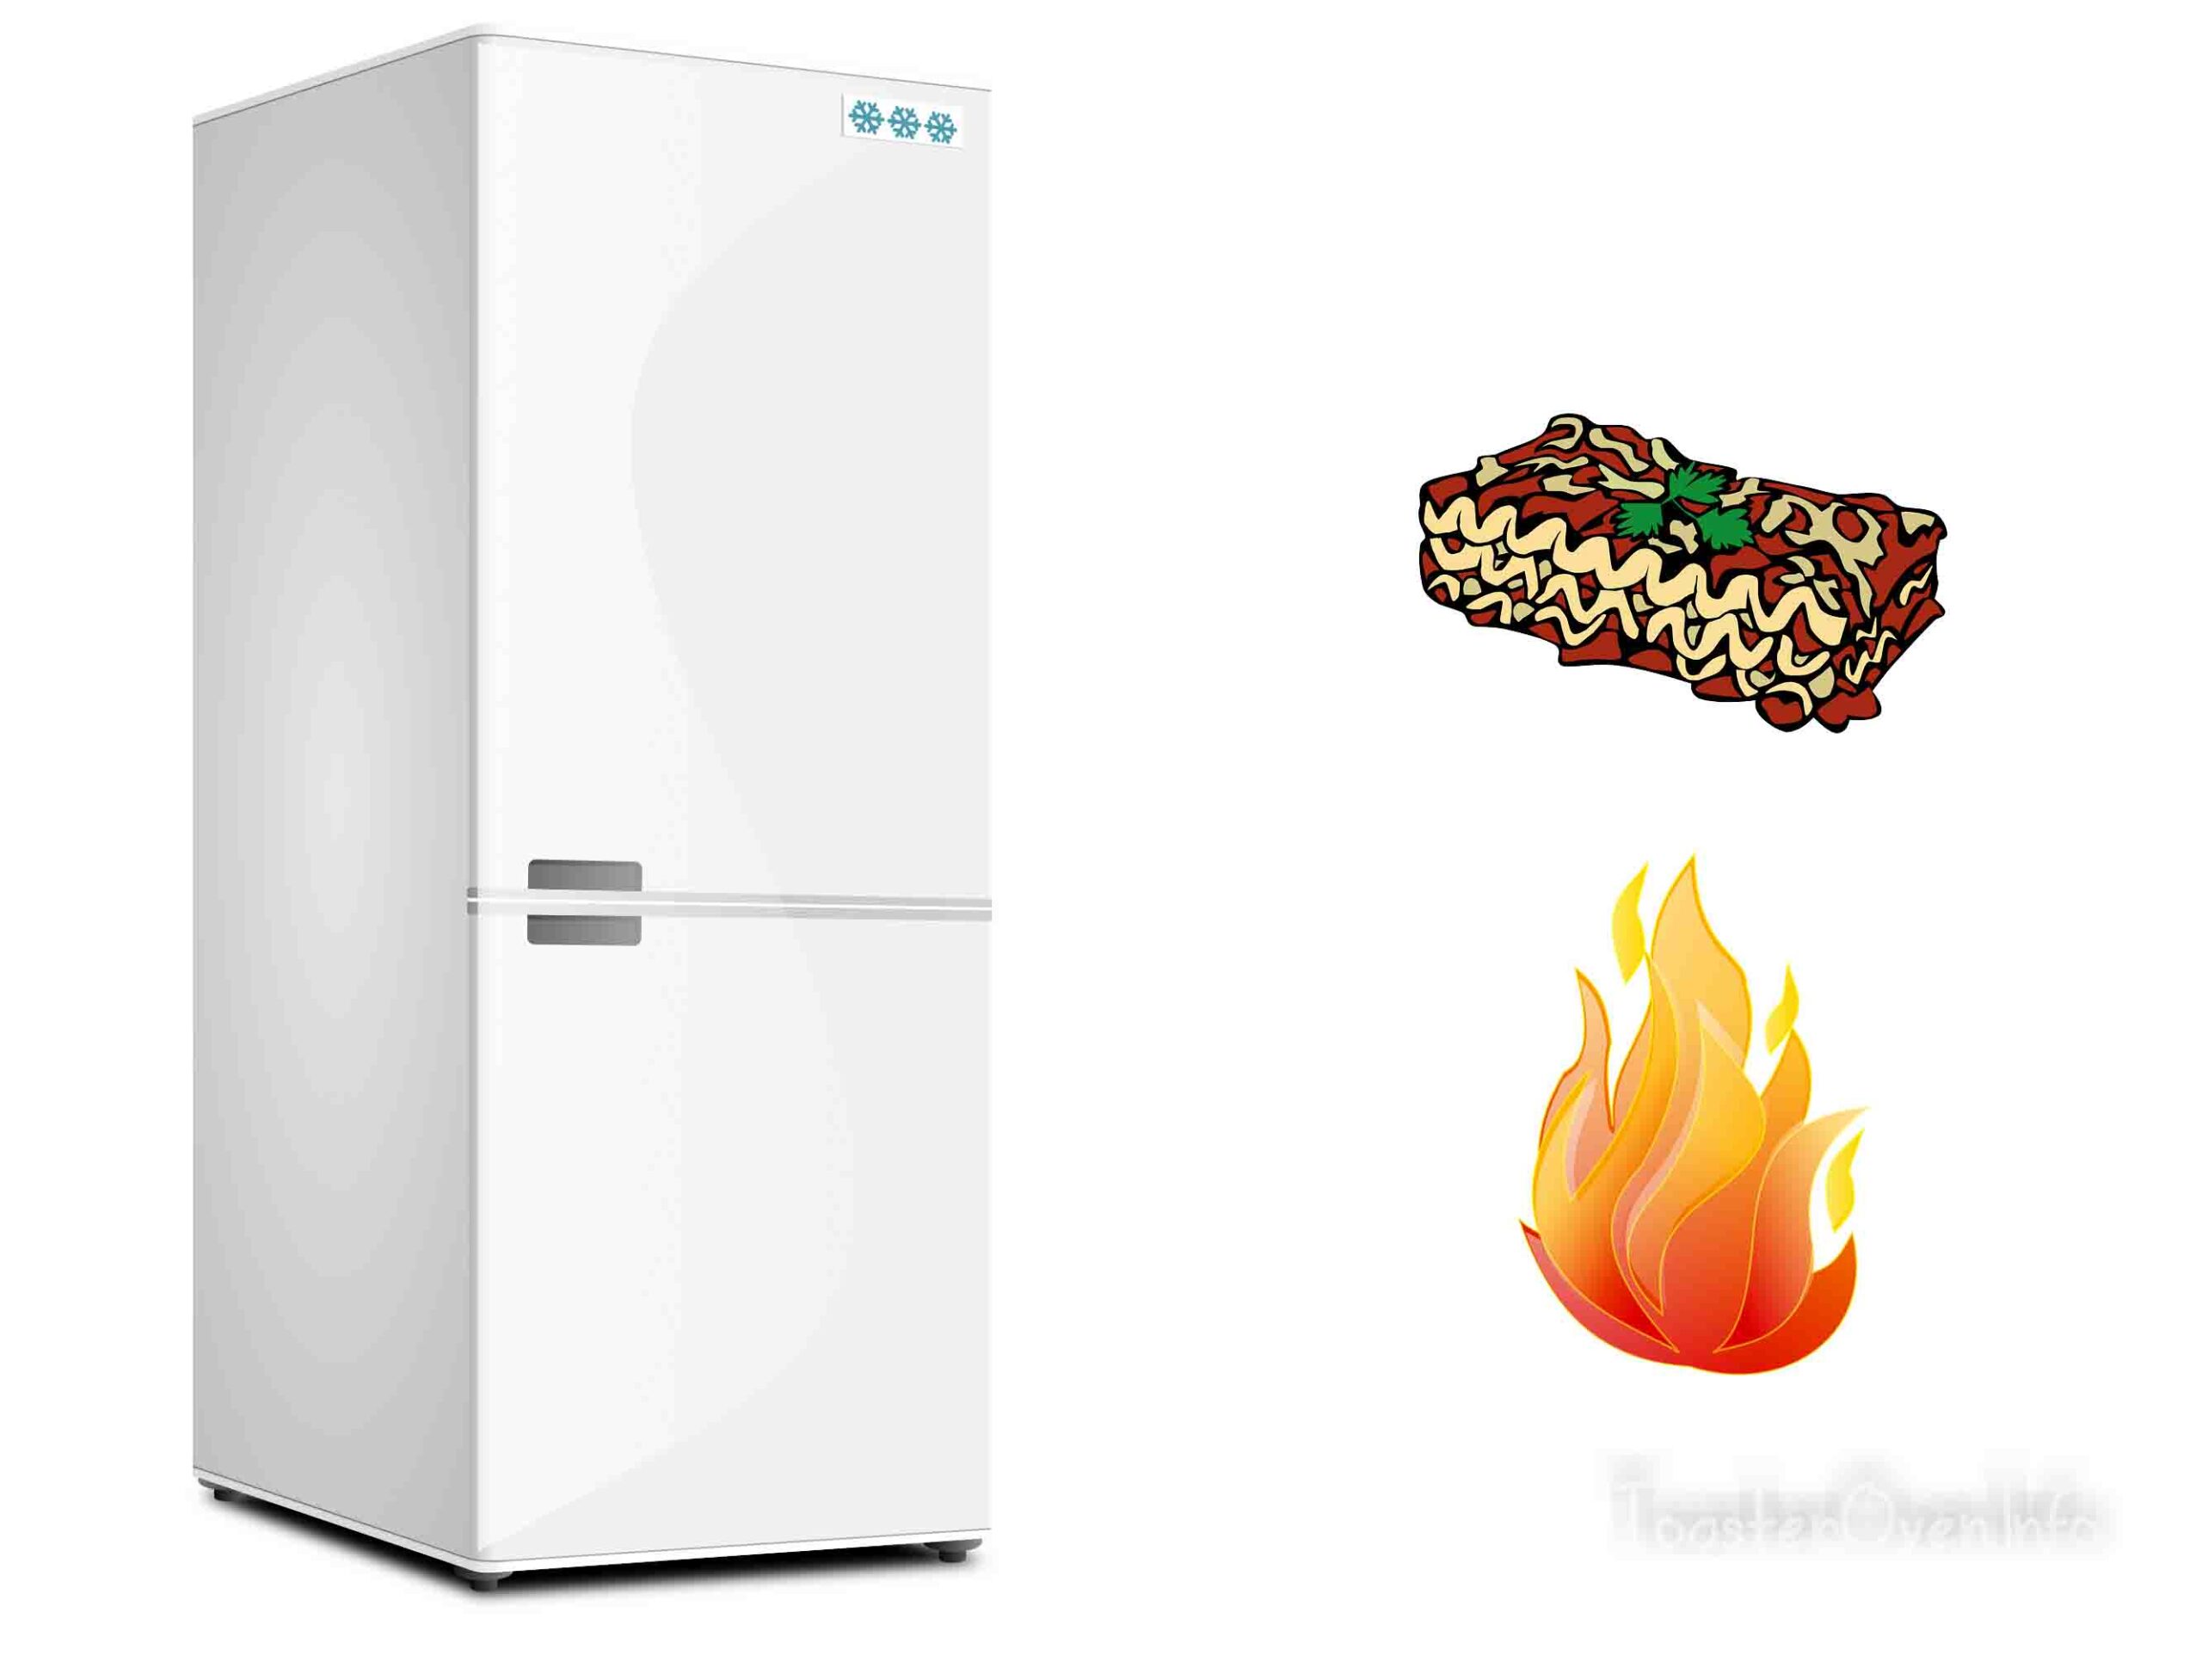 What is a convection toaster oven